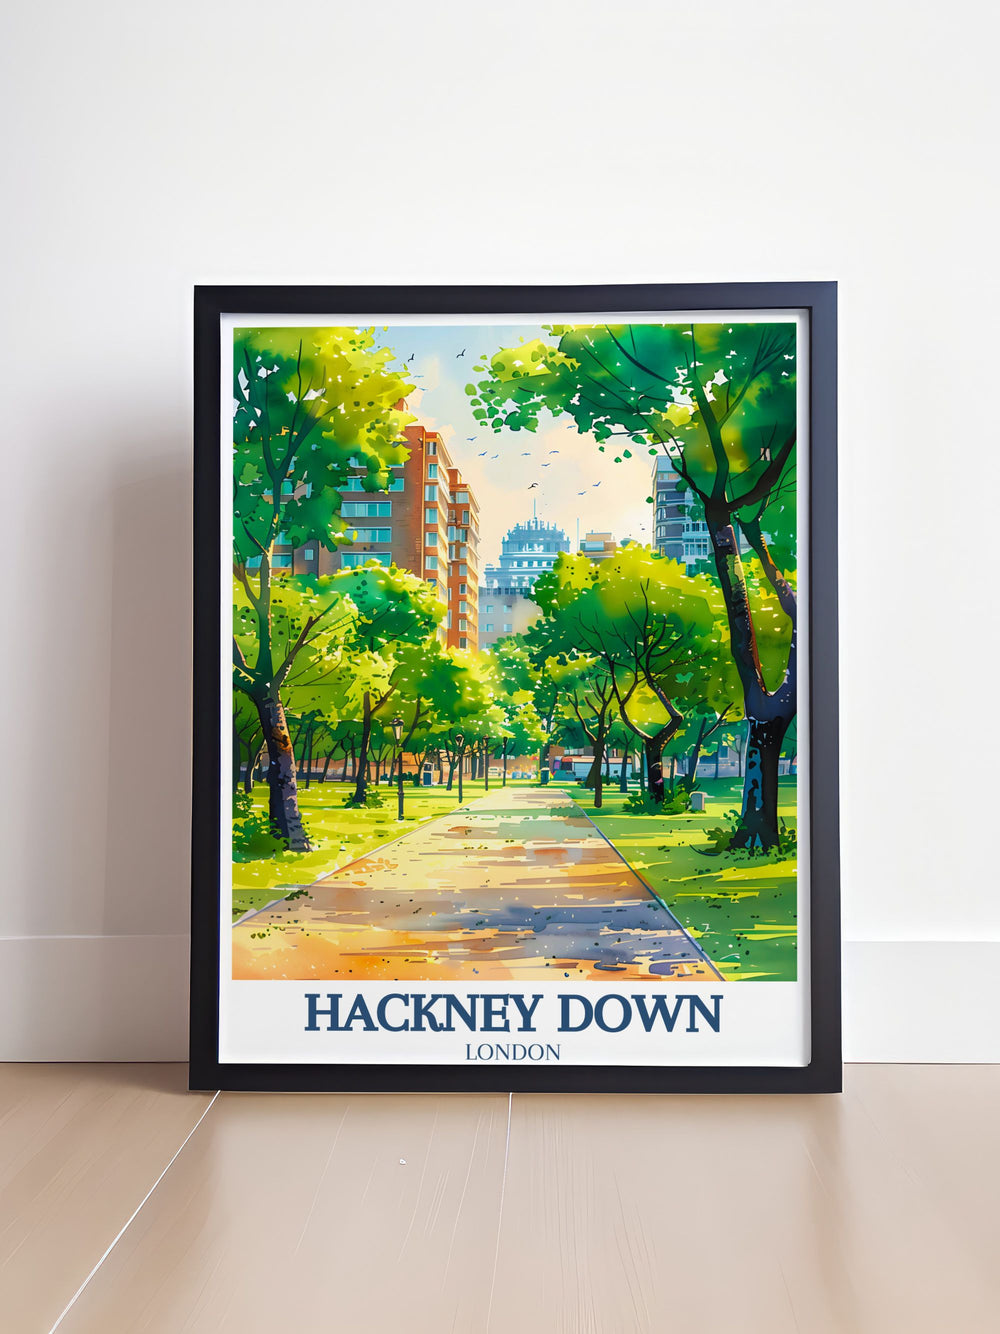 Featuring the iconic green spaces of Hackney Downs, this travel poster captures the essence of its tranquil beauty and vibrant community, perfect for creating a serene atmosphere in any room.